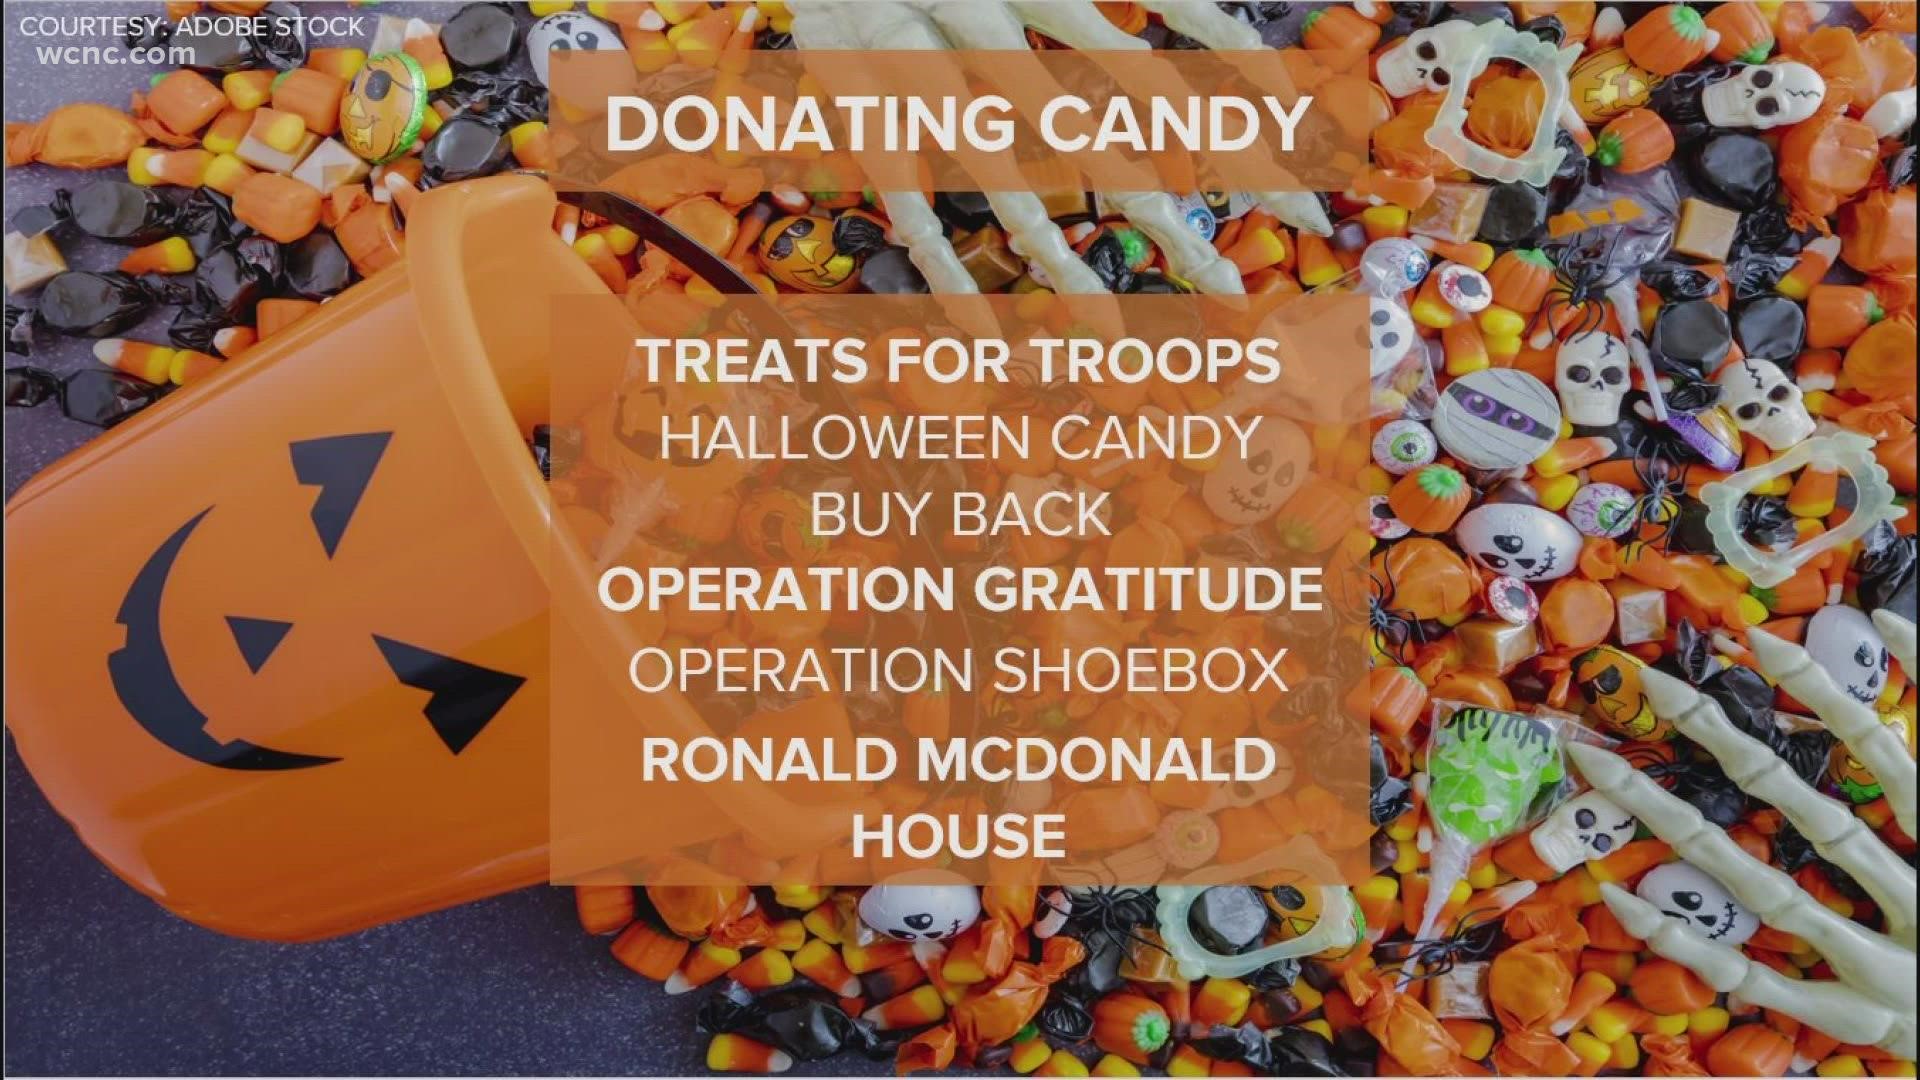 Here's how to have the Spurs Coyote drop off Halloween candy at